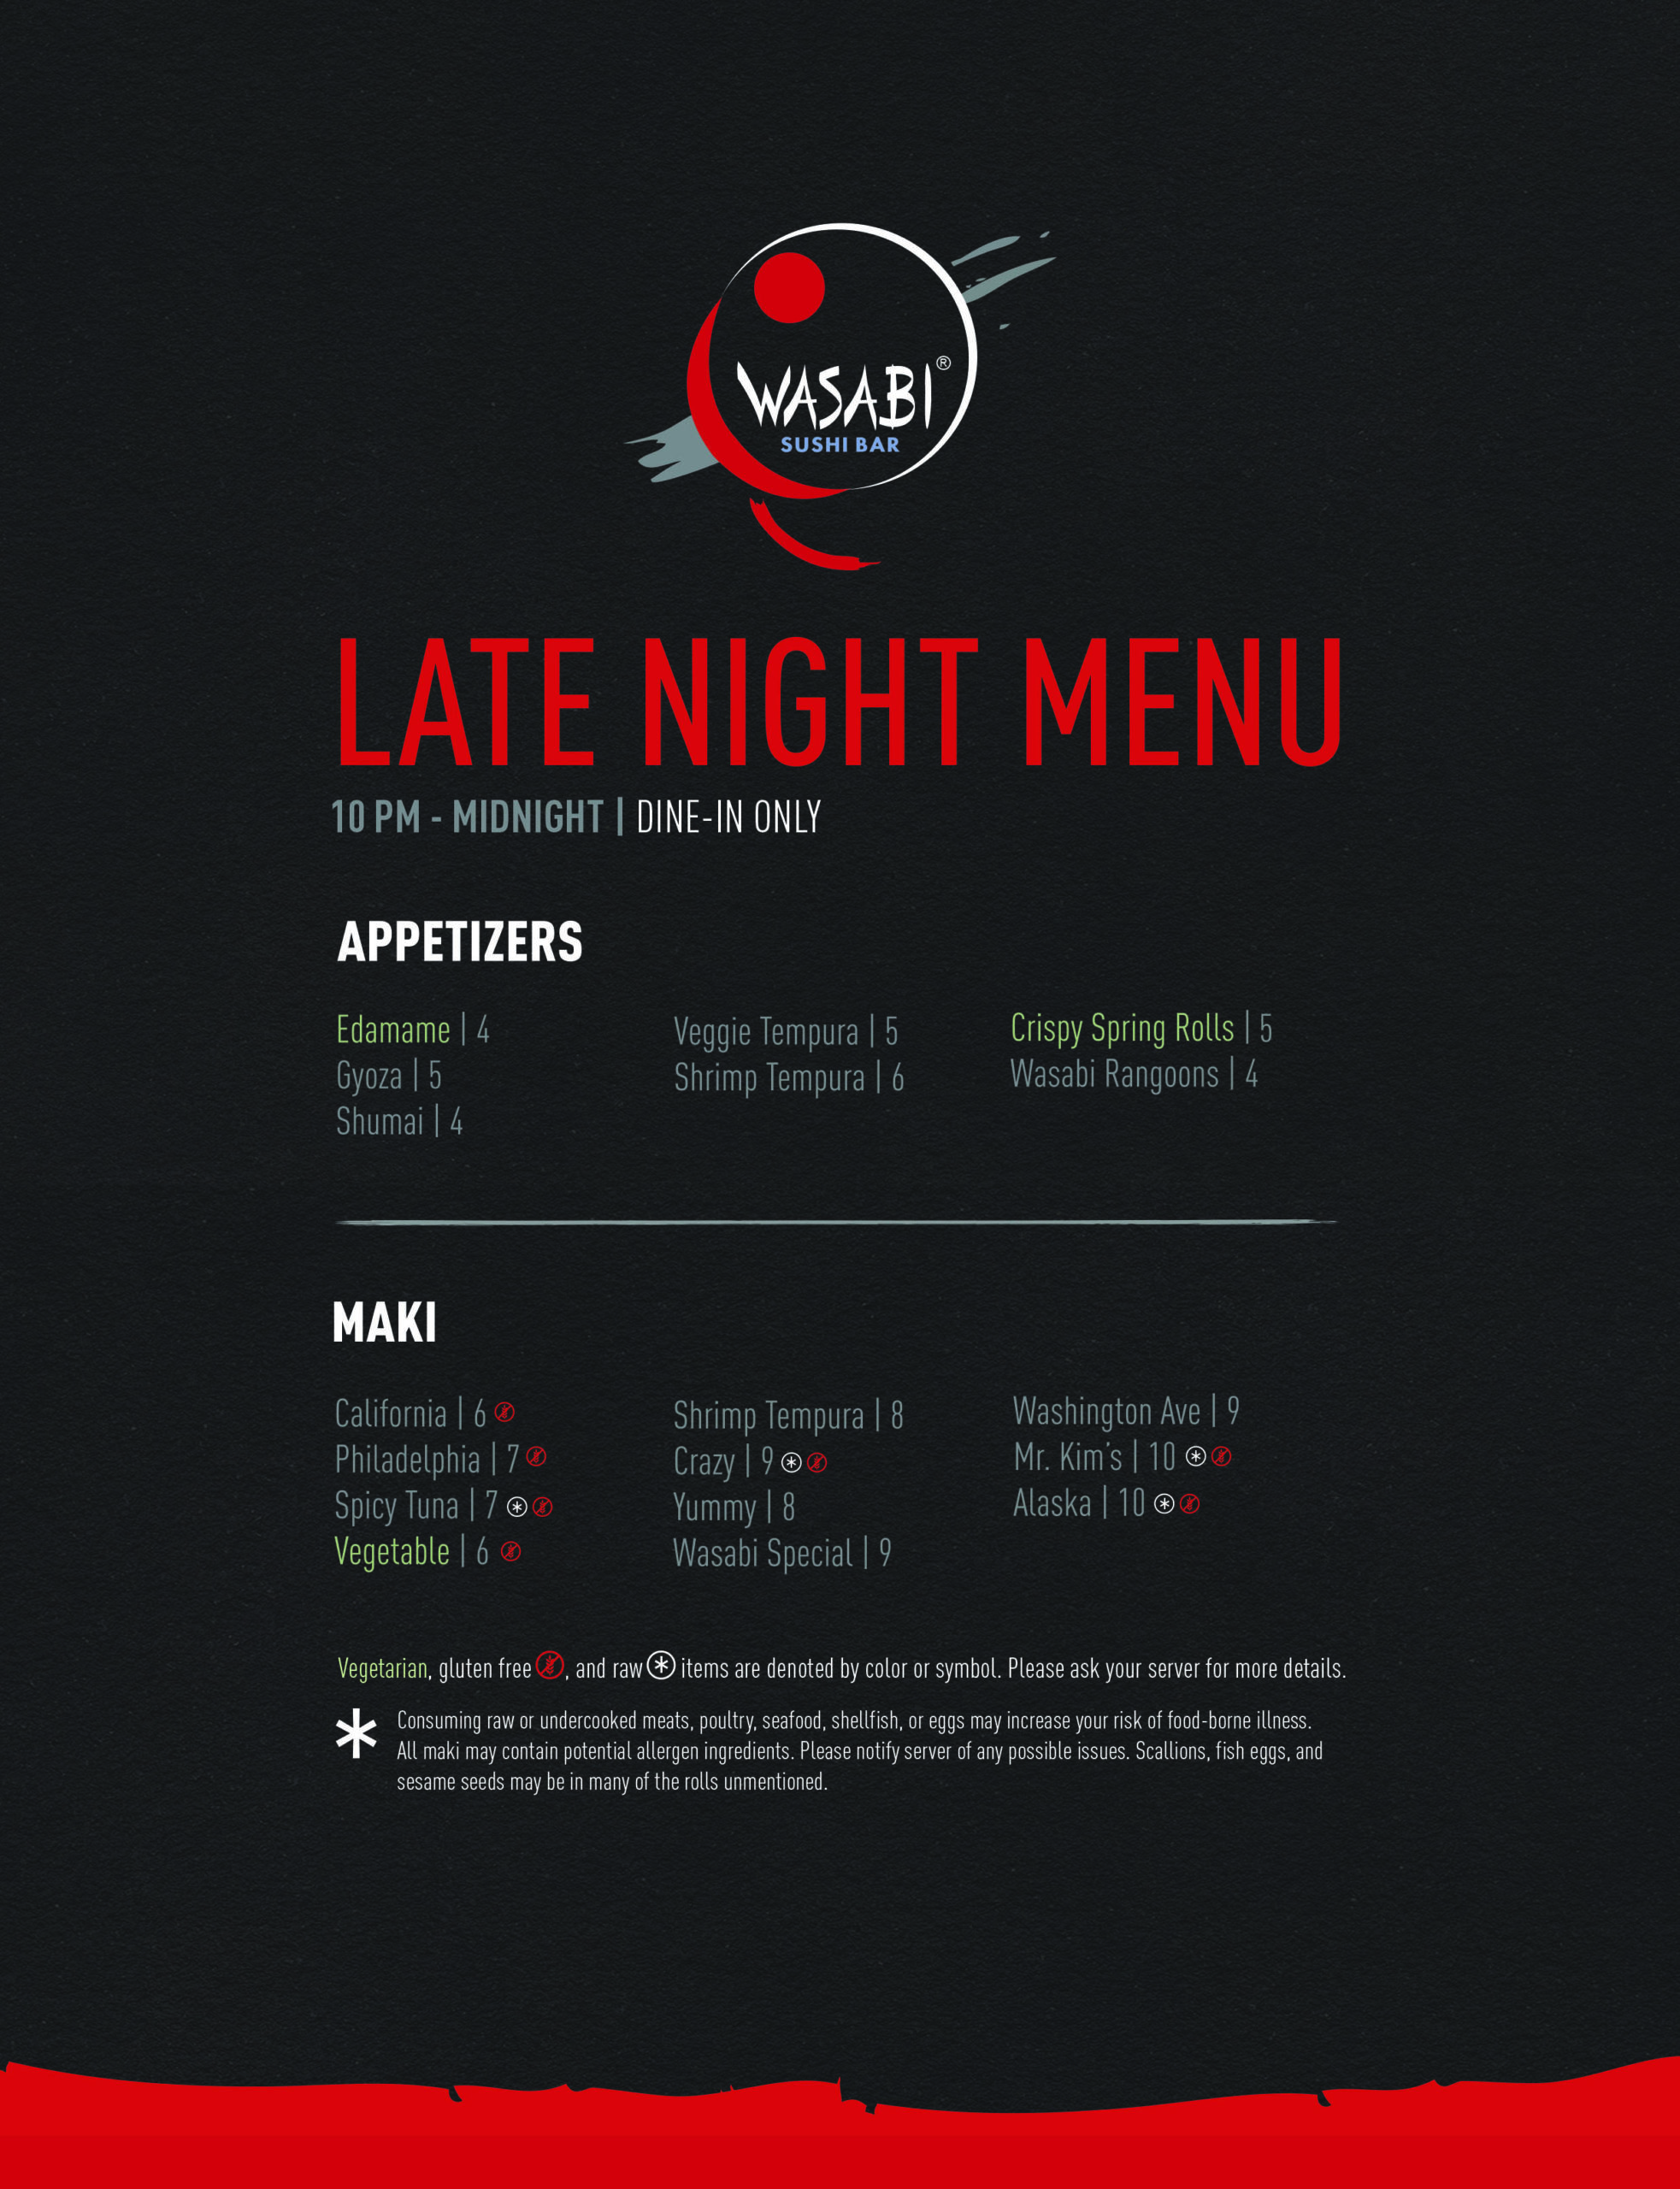 Late Night Menu - Cortex Location Only - 10pm - midnight, dine in only, deals on appetizers and maki